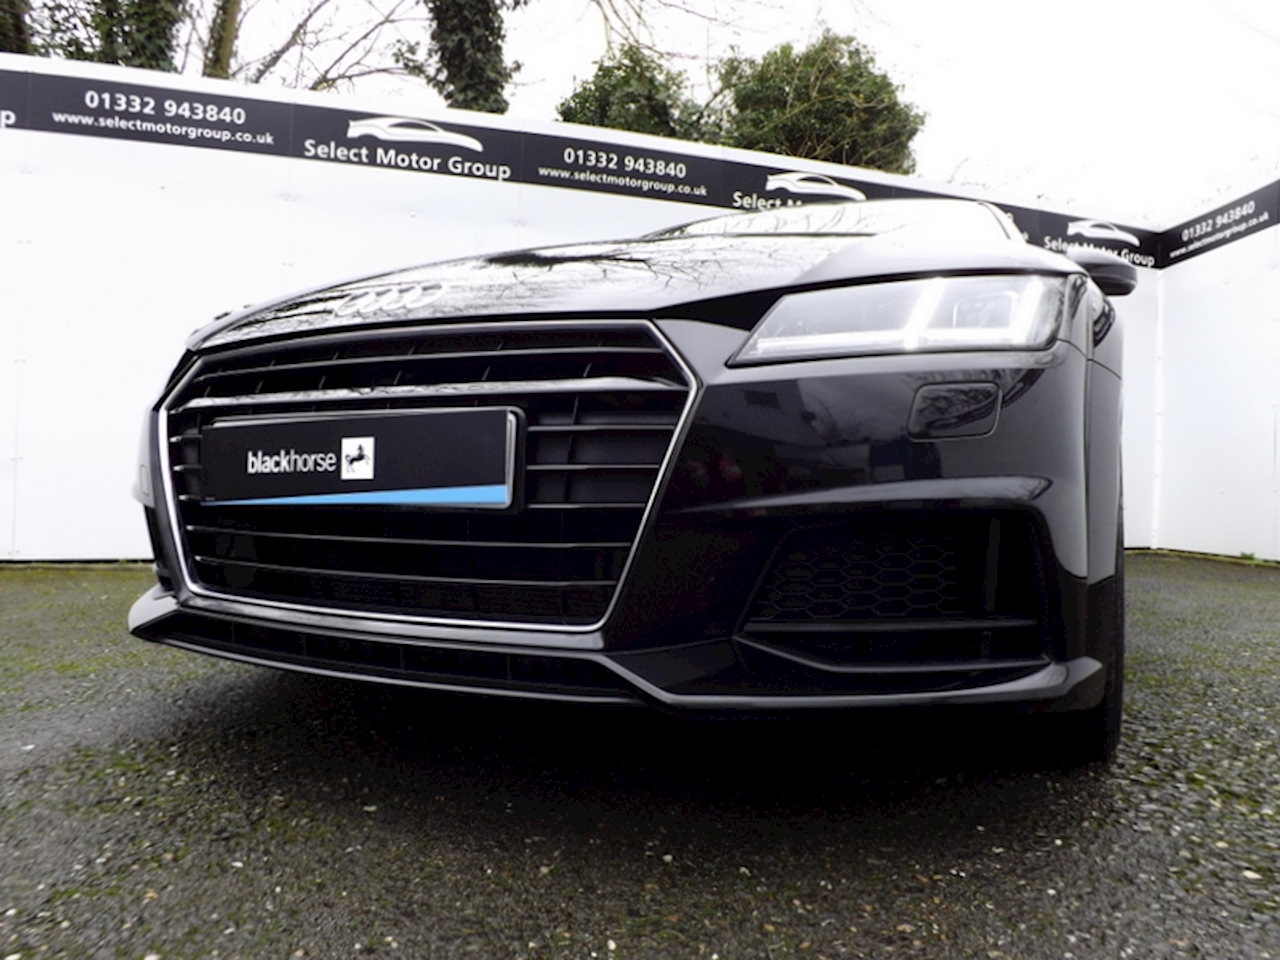 Used 15 Audi Tt 2 0 Tdi 184 Ultra S Line 2dr Coupe Manual Diesel For Sale In Derbyshire Select Motor Group